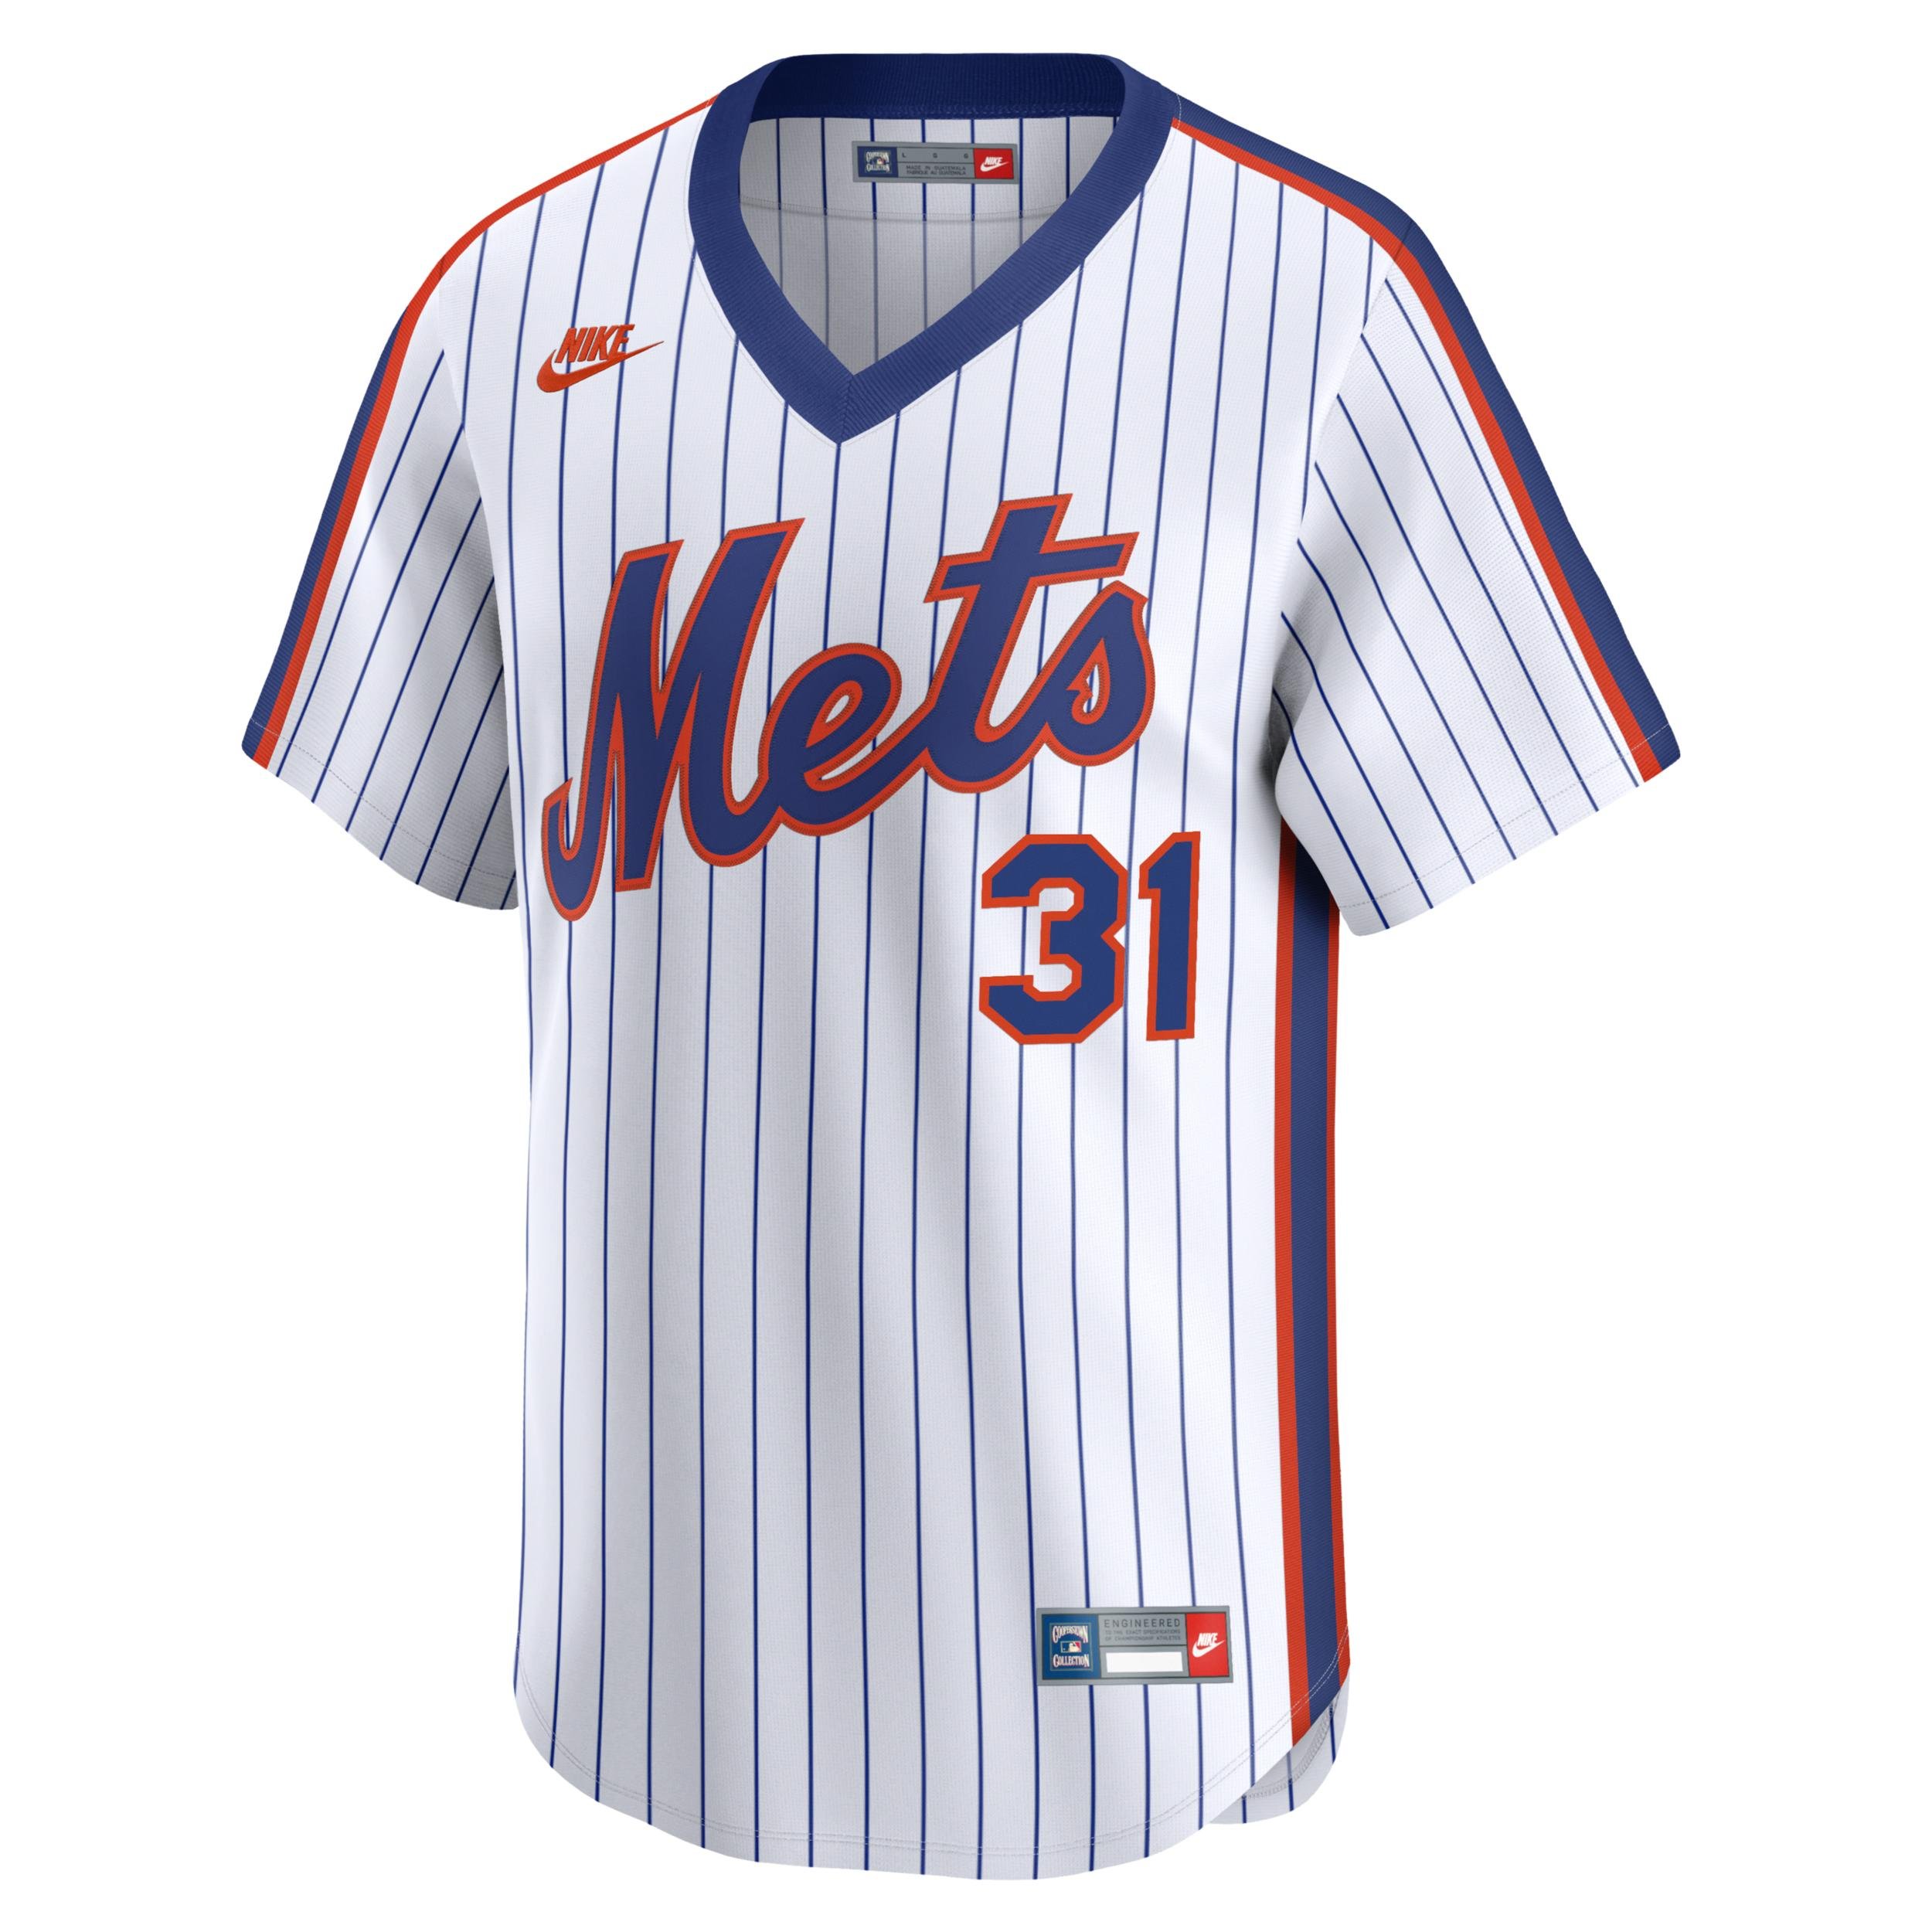 Mike Piazza New York Mets Cooperstown Nike Men's Dri-FIT ADV MLB Limited Jersey by NIKE